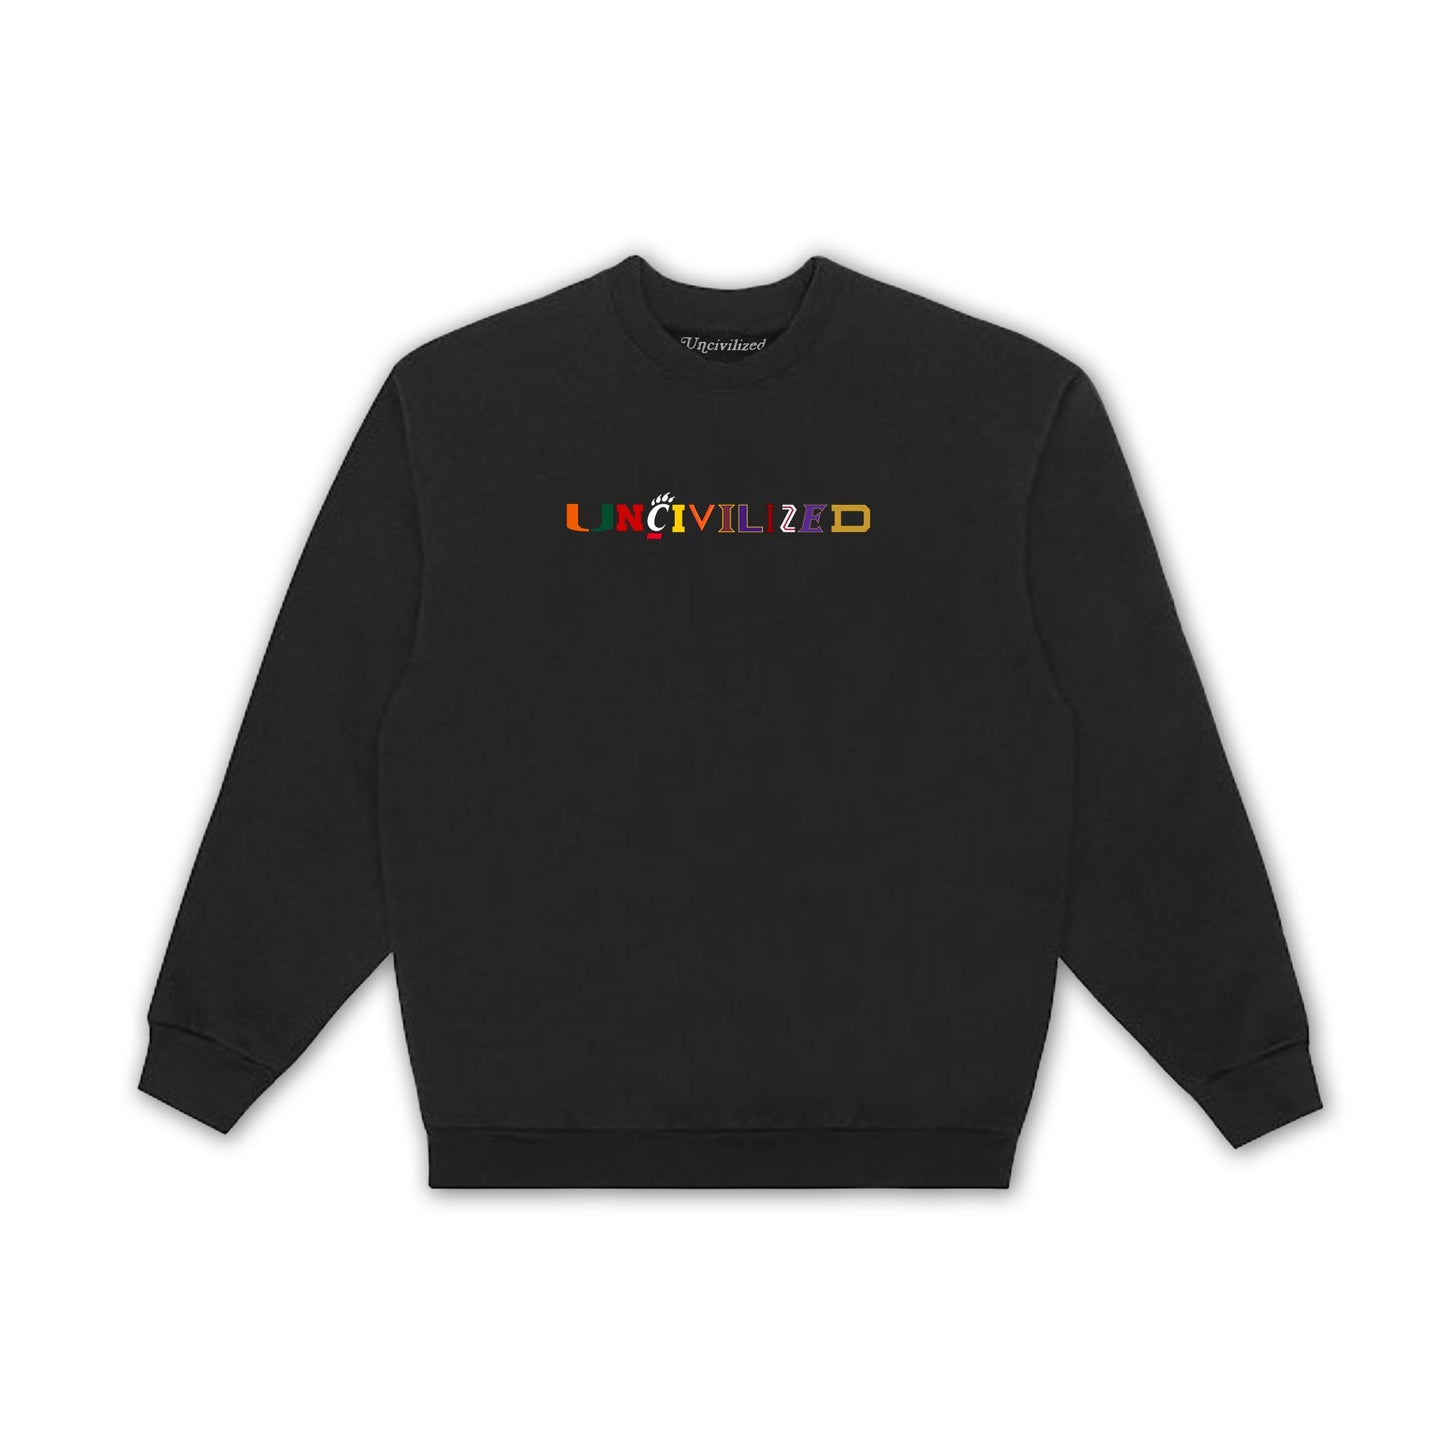 EARLY ACCESS: UNCIVILIZED "MARCH MADNESS" CREWNECK SWEATSHIRT